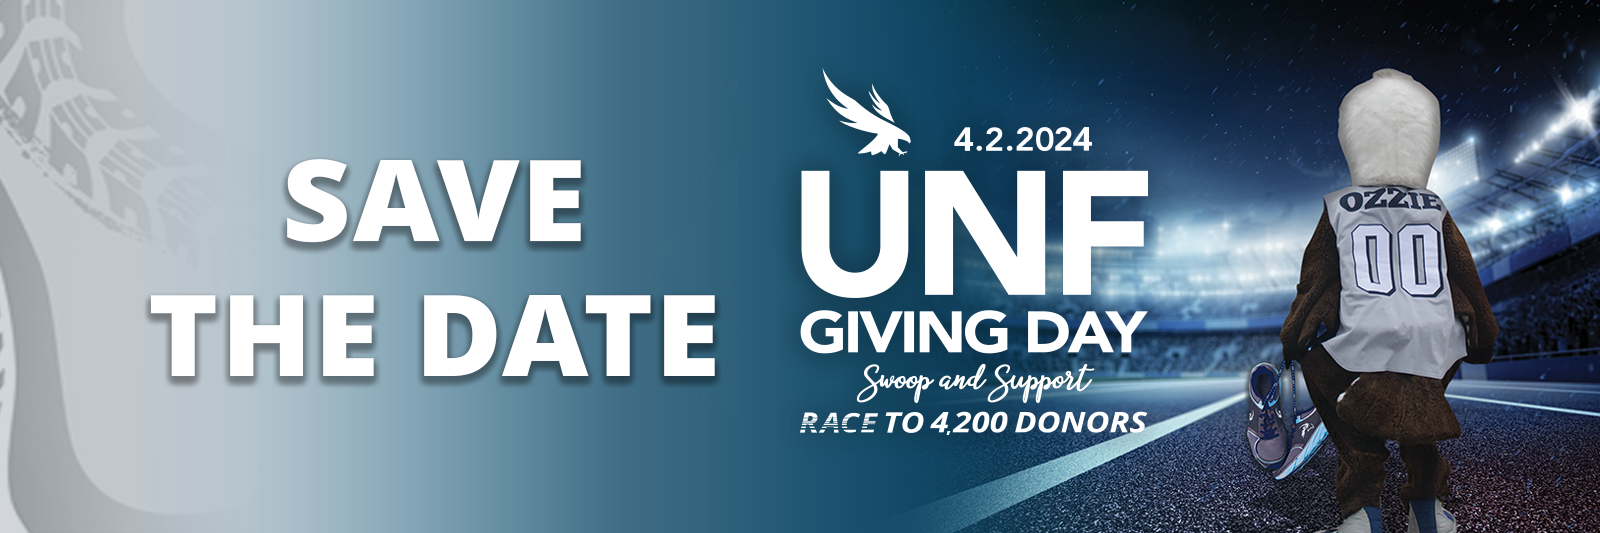 save the date with the UNF giving logo with ozzie holding shoes